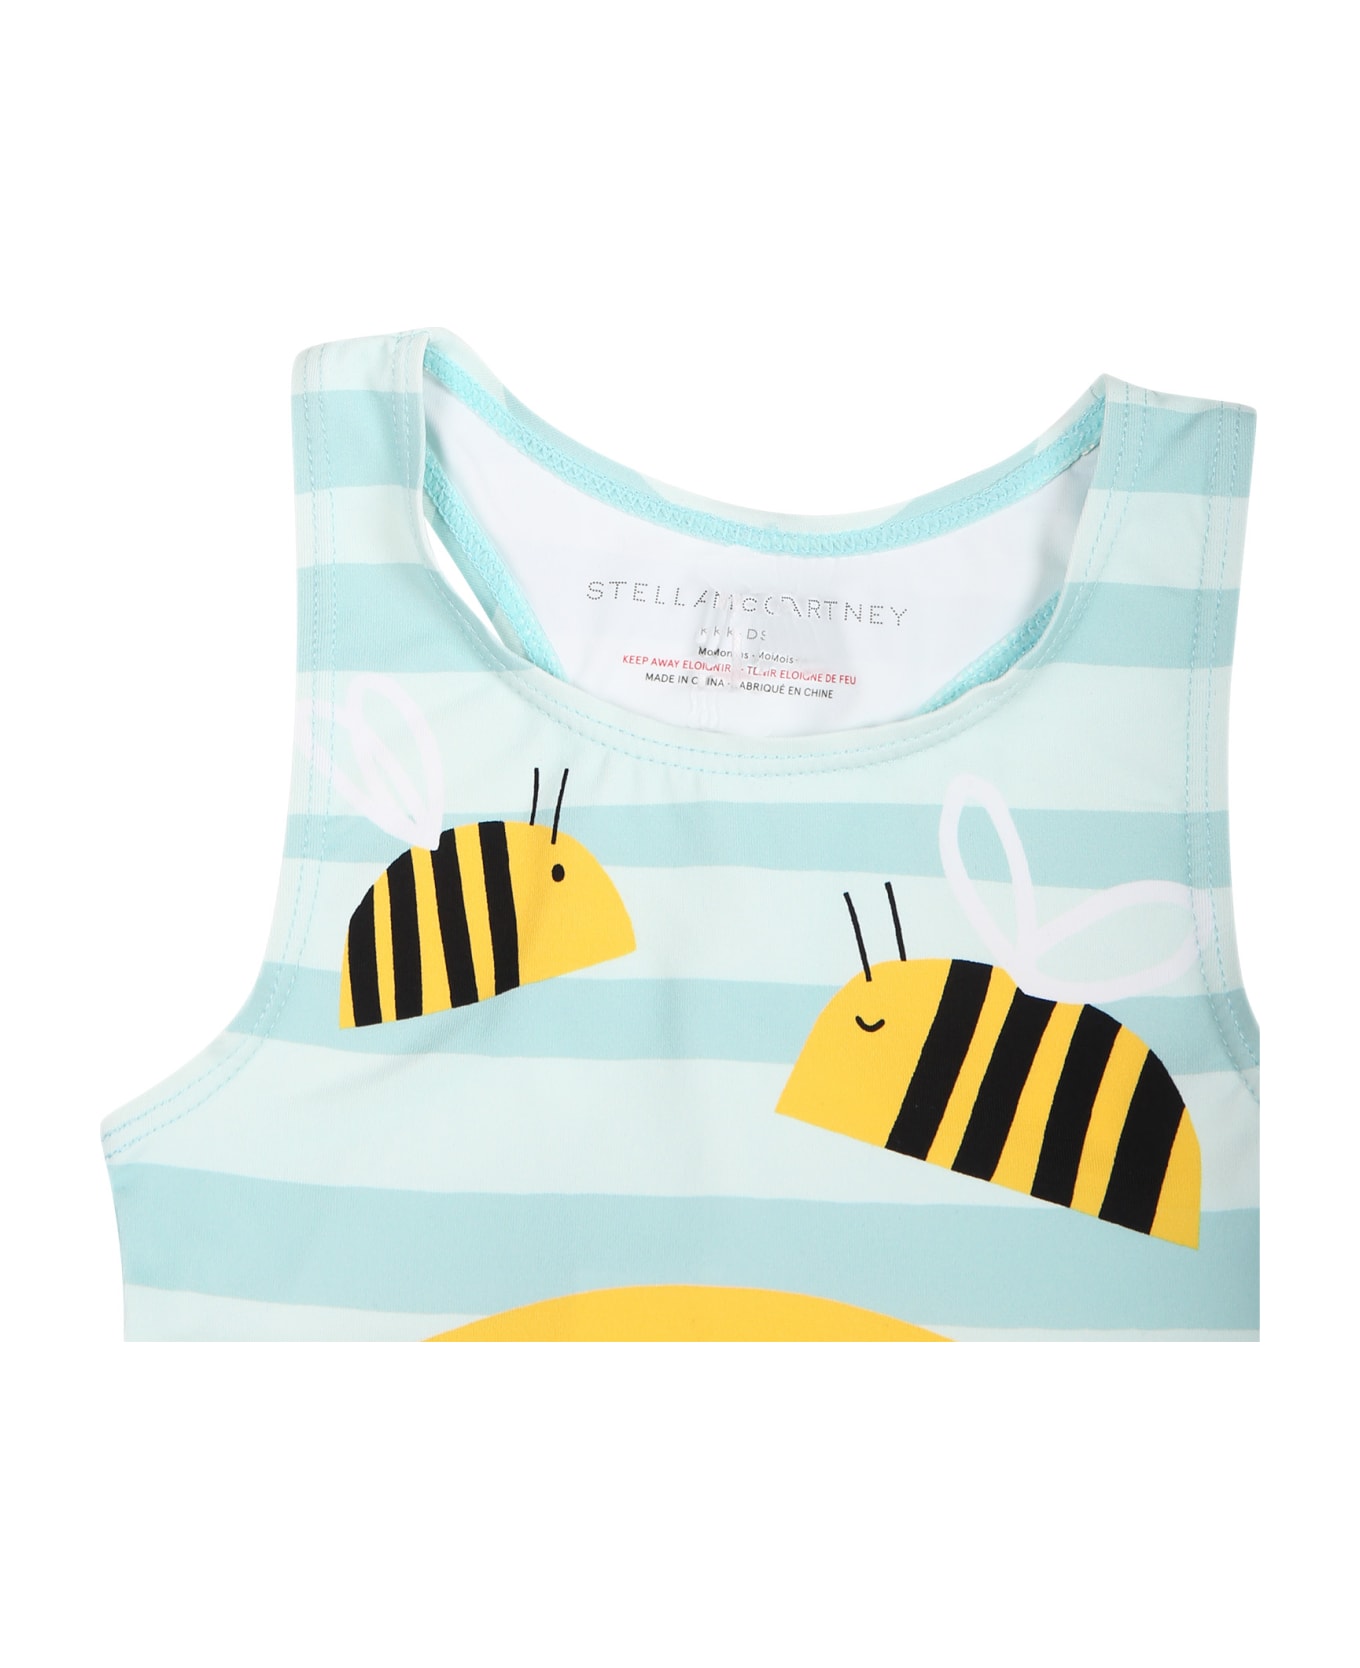 Stella McCartney Light Blue Swimsuit For Baby Girl With Bees - BLUE